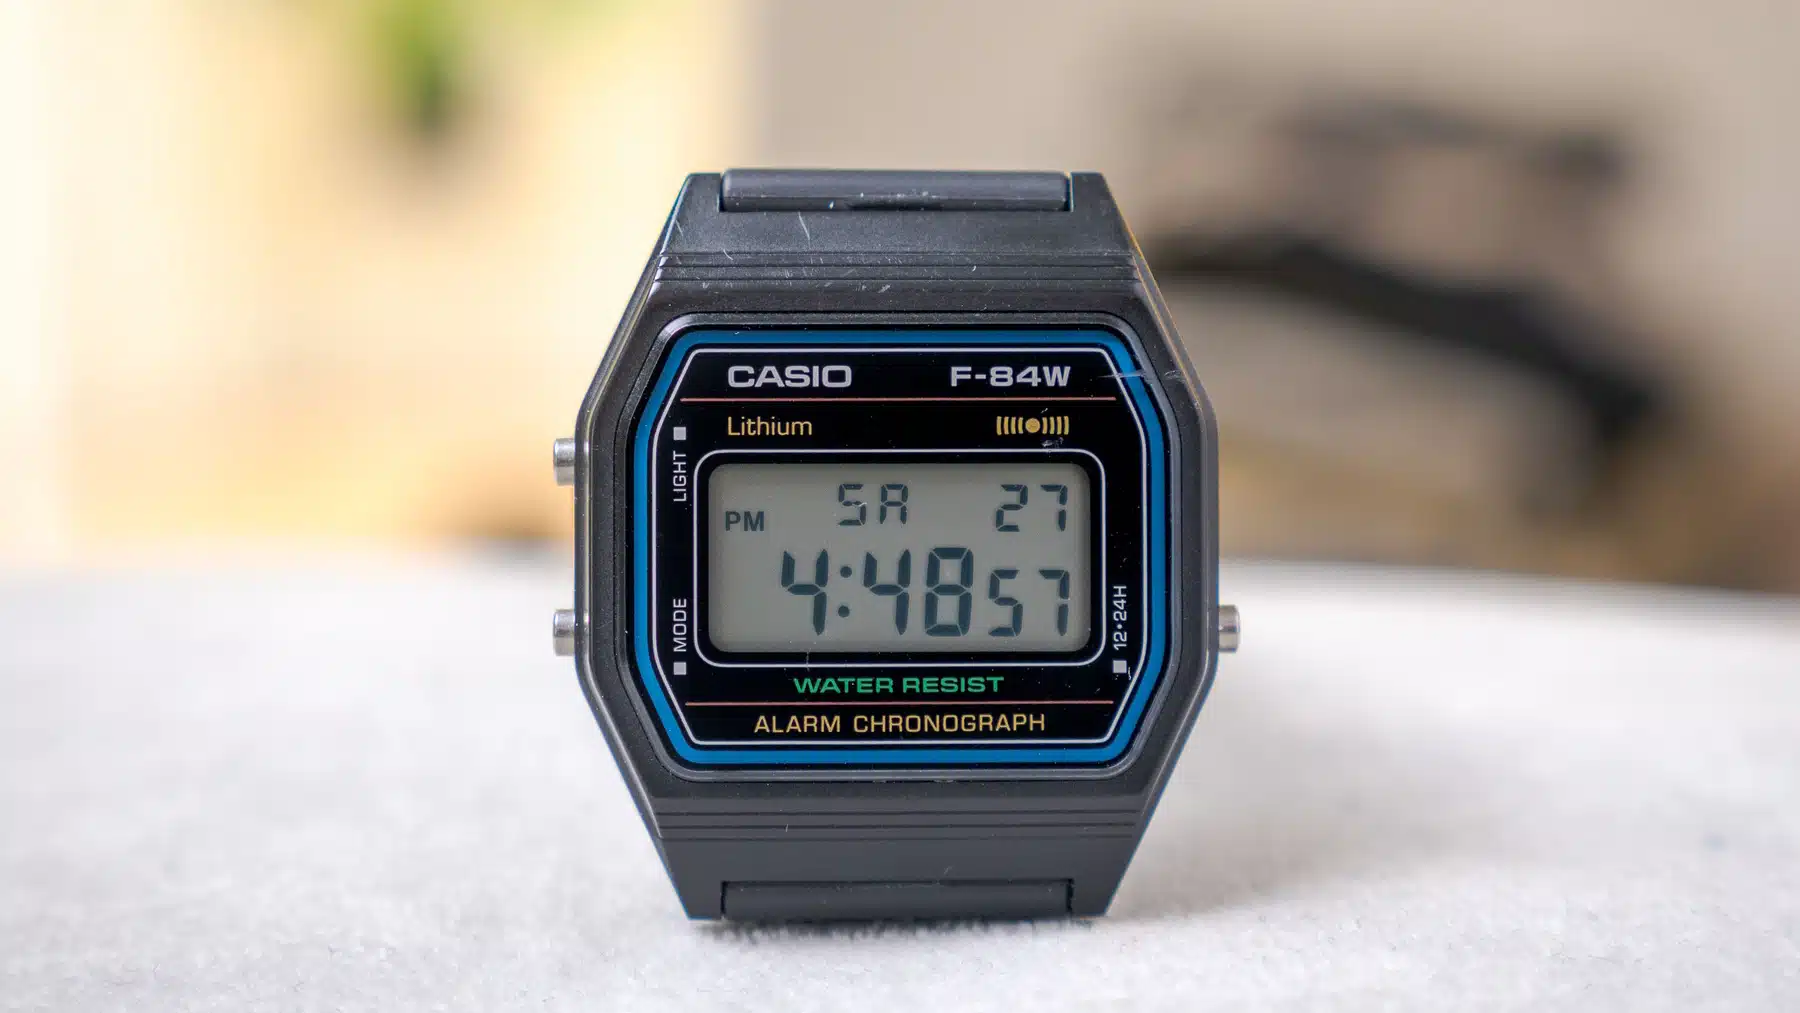 Casio Watch Face 2 by yuhang on Dribbble-saigonsouth.com.vn